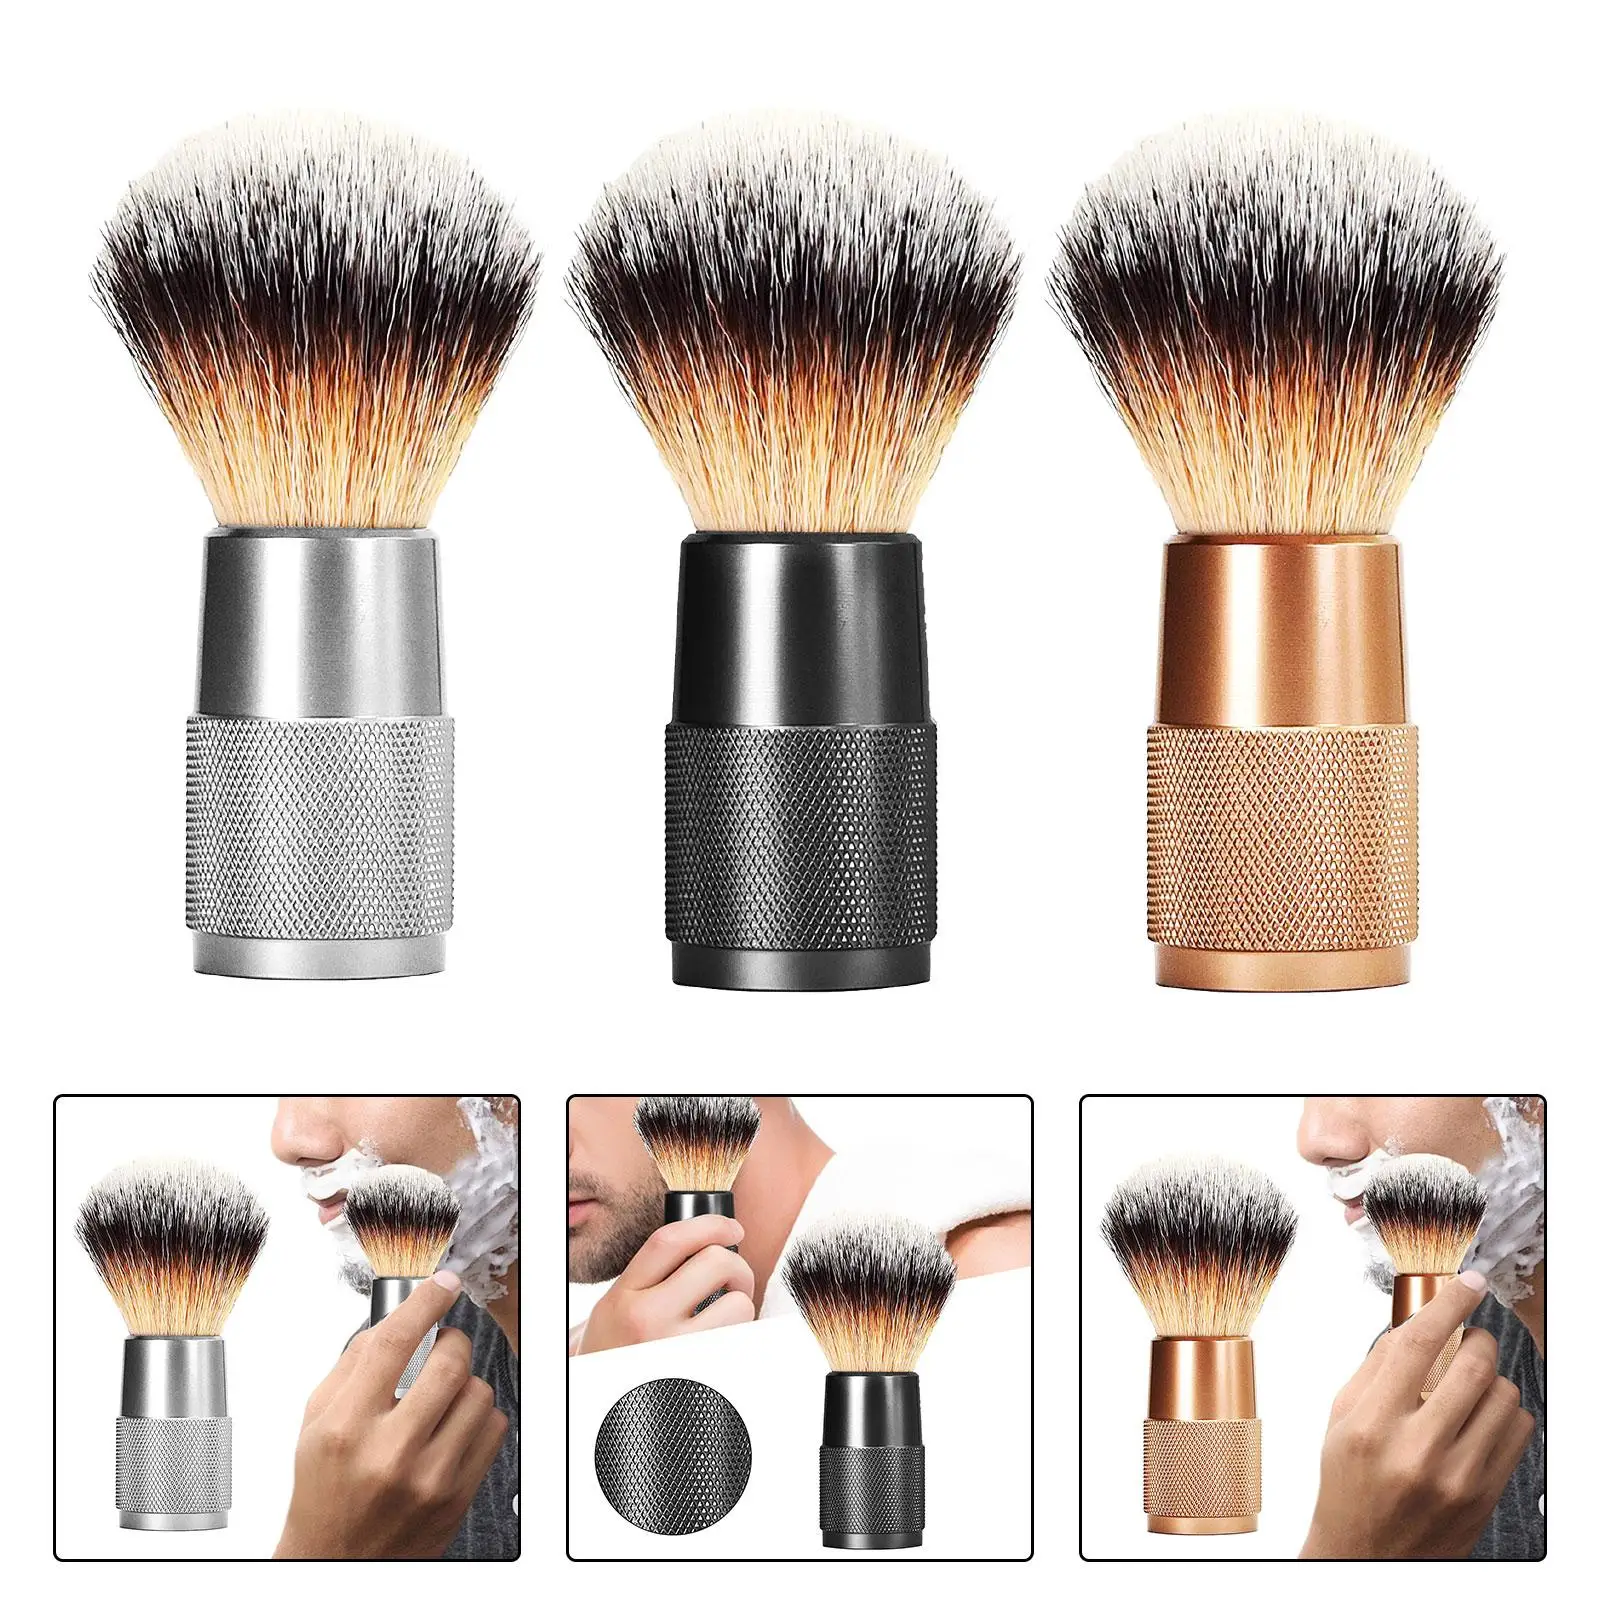 Shaving Brush Father Day Gifts Facial Beard Cleaning Accessories Portable Professional Nylon Synthetic Bristles Aluminum Handle